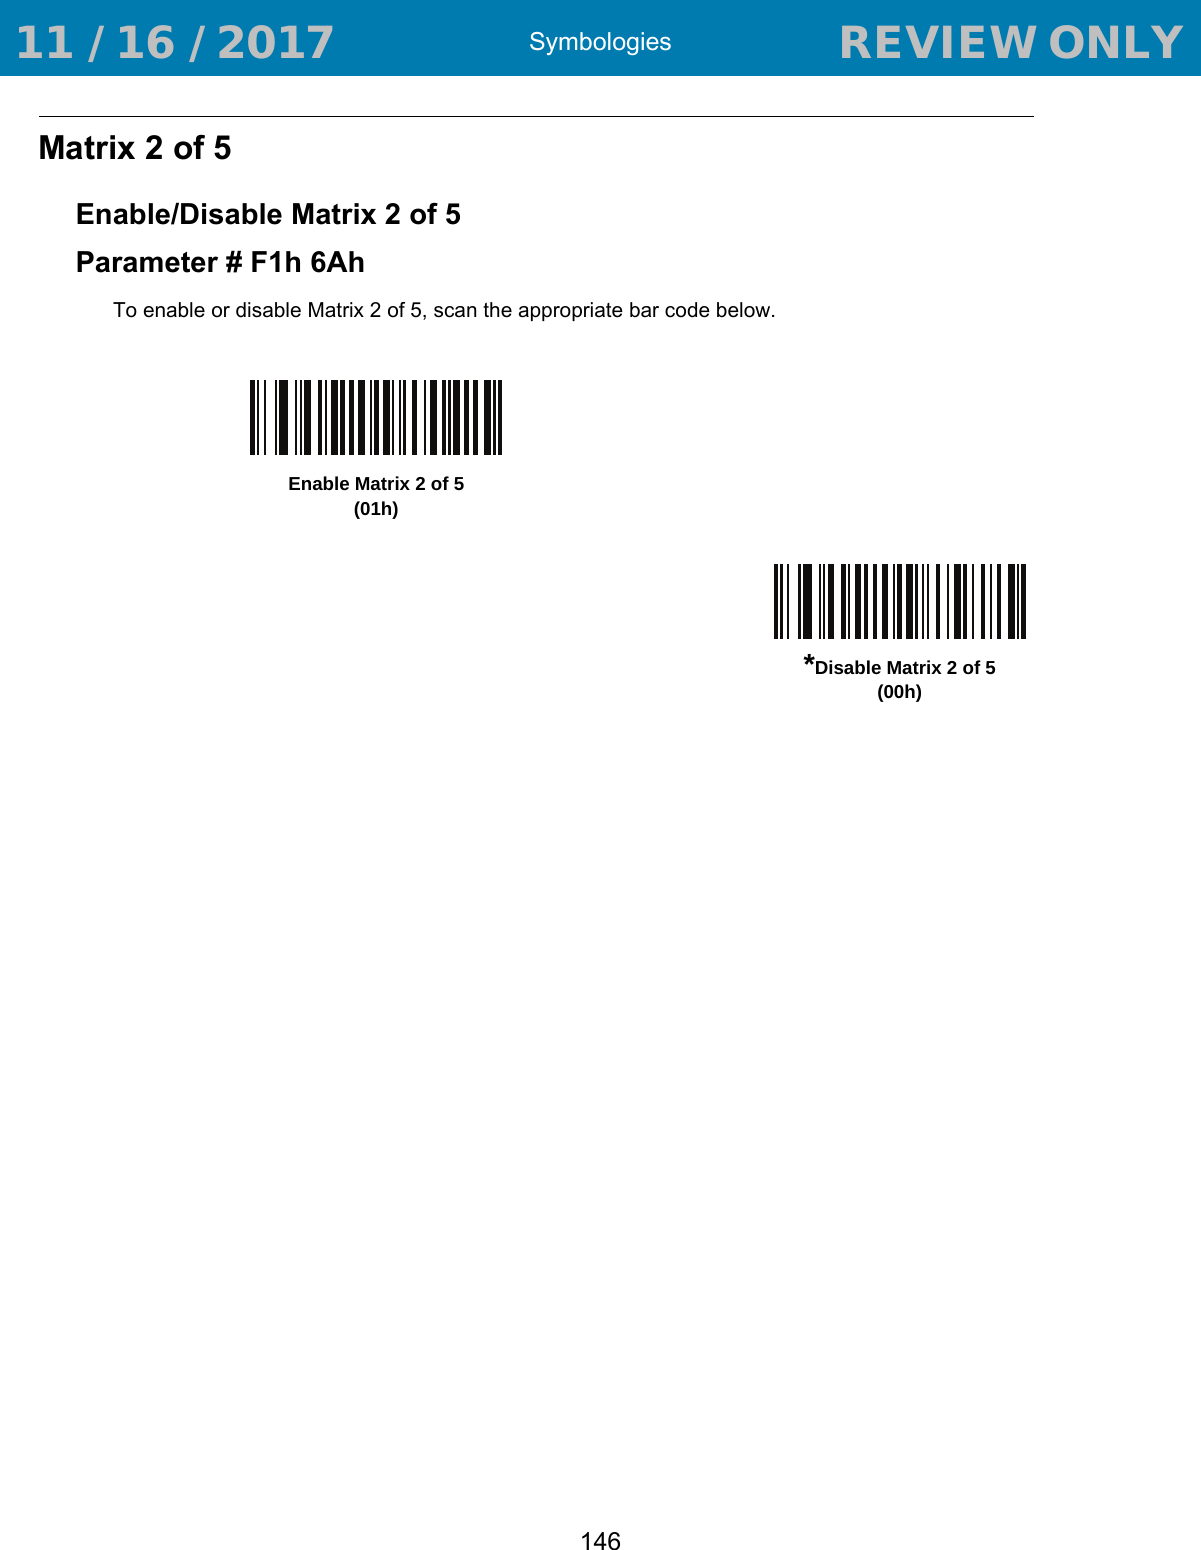 Symbologies146Matrix 2 of 5Enable/Disable Matrix 2 of 5Parameter # F1h 6AhTo enable or disable Matrix 2 of 5, scan the appropriate bar code below.Enable Matrix 2 of 5 (01h)*Disable Matrix 2 of 5 (00h) 11 / 16 / 2017                                  REVIEW ONLY                             REVIEW ONLY - REVIEW ONLY - REVIEW ONLY